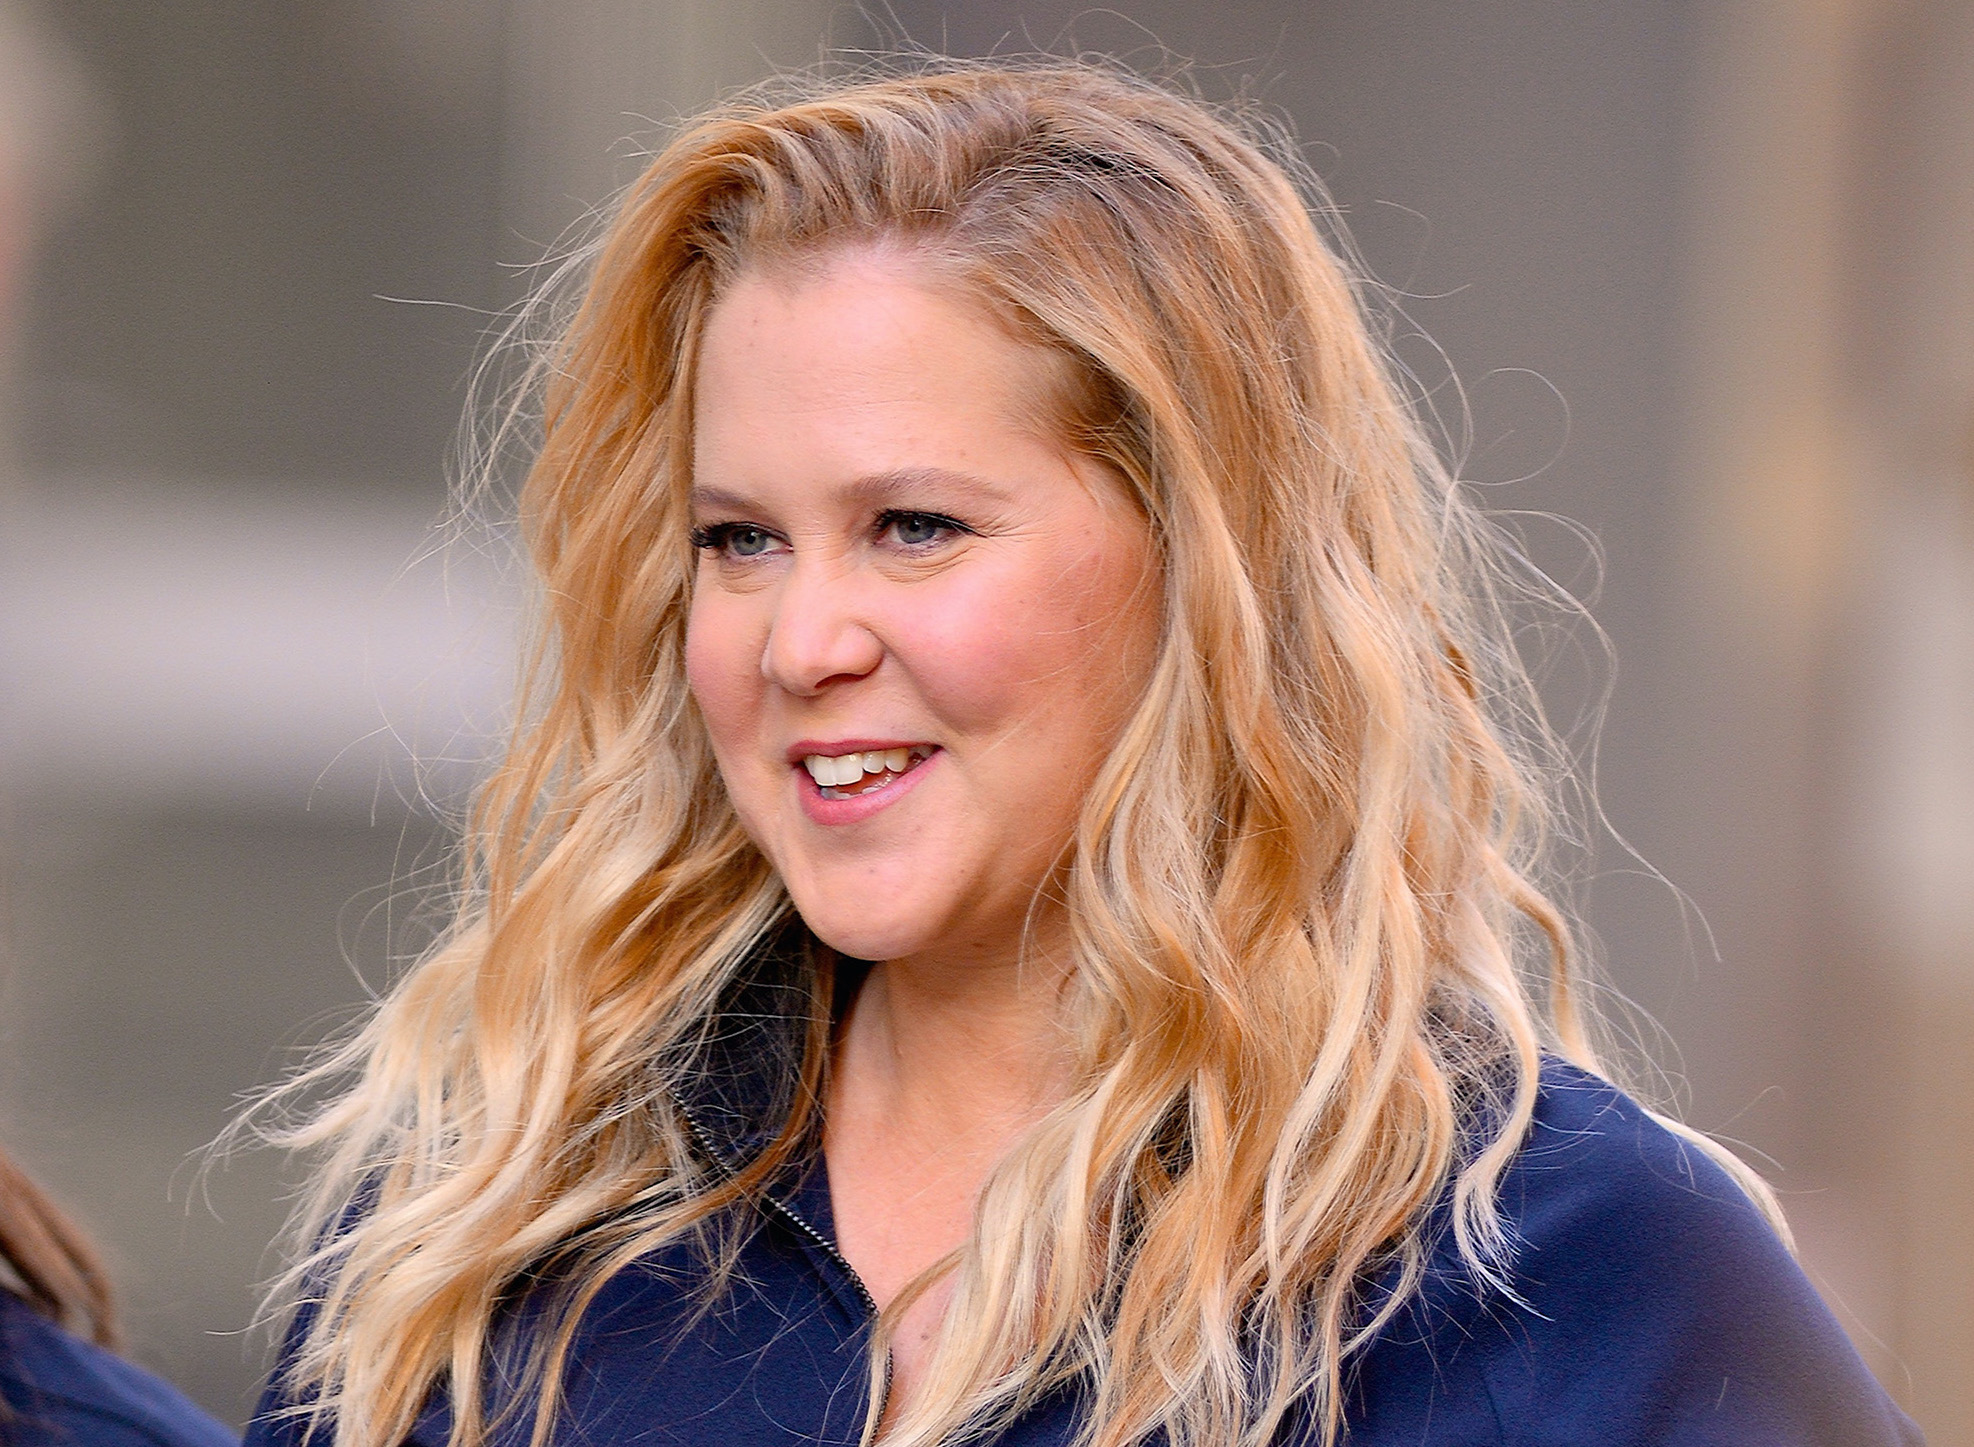 Intuition Bevidst bande The “No Screen Time” Rule in Amy Schumer's House Doesn't Seem to Be  WorkingHelloGiggles